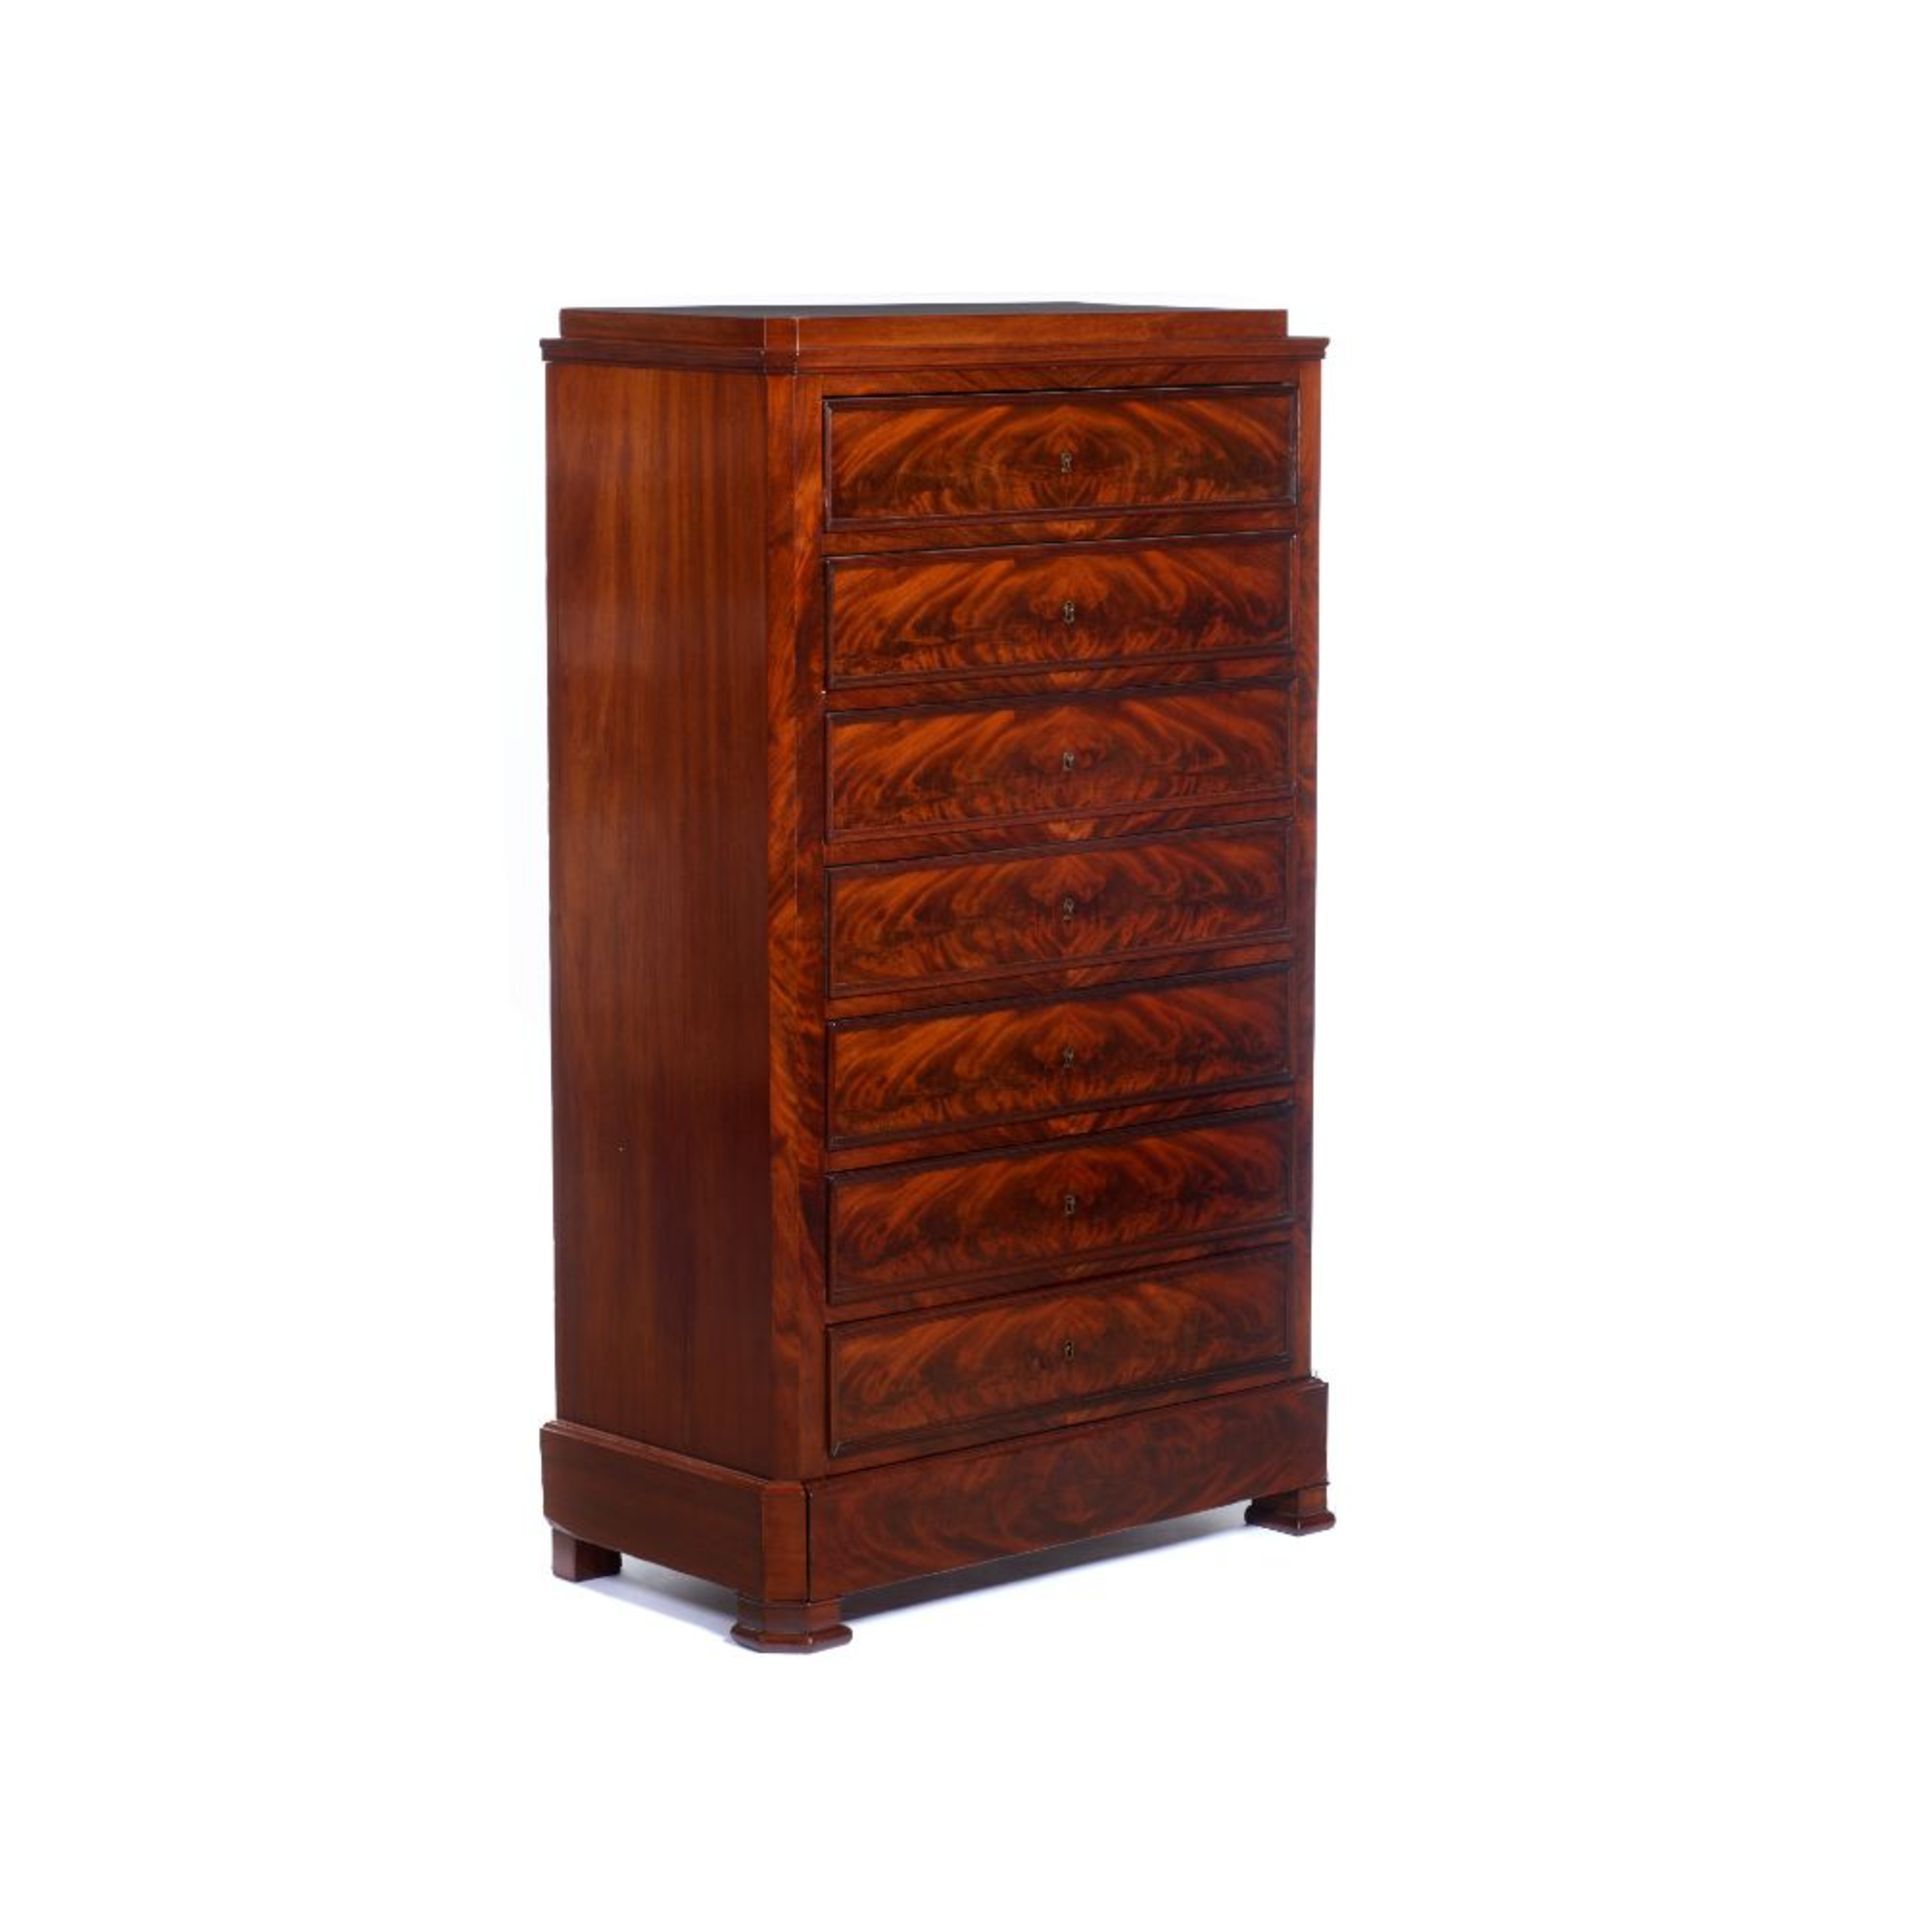 An Empire style semainier, Mahogany, Seven drawers and one shoe cupboard, France, 19th century,